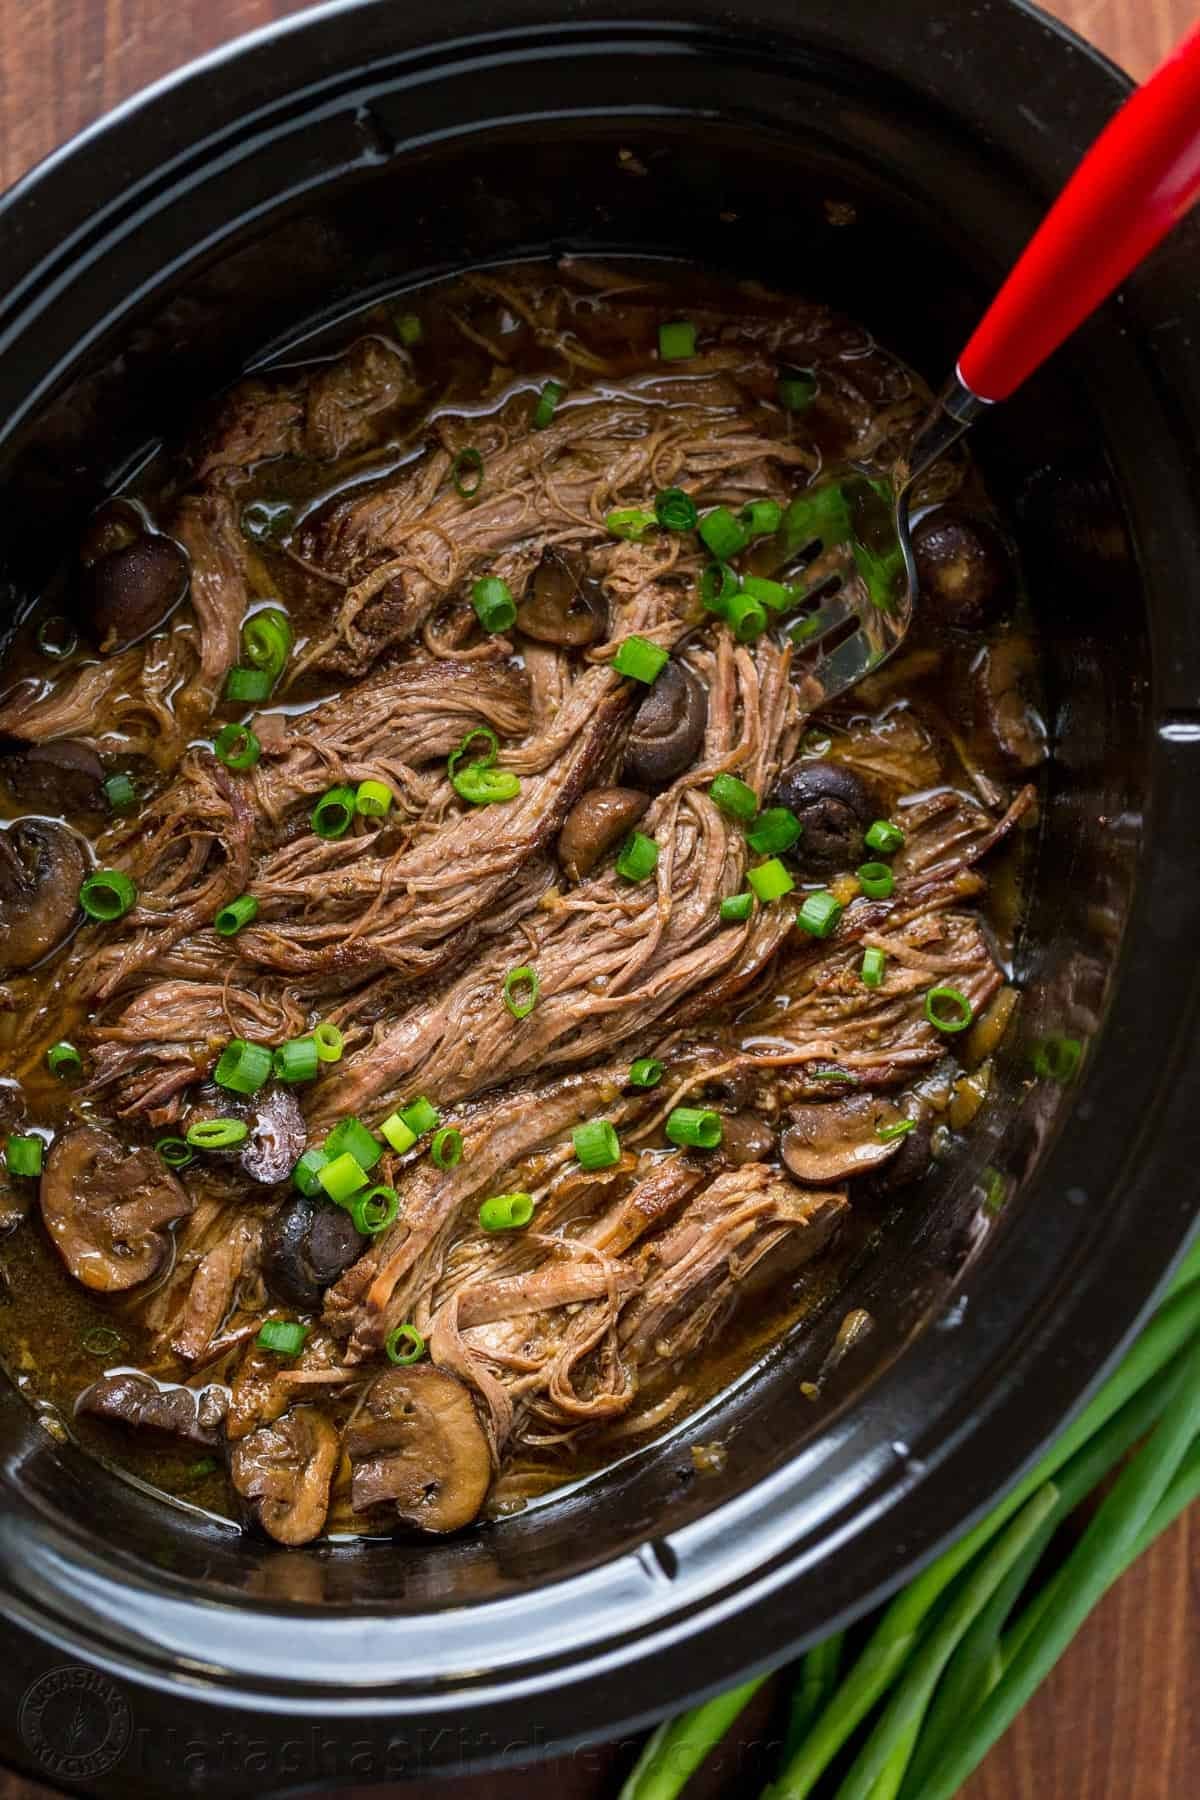 Beef brisket with caramelized onions and mushrooms on a crockpot.